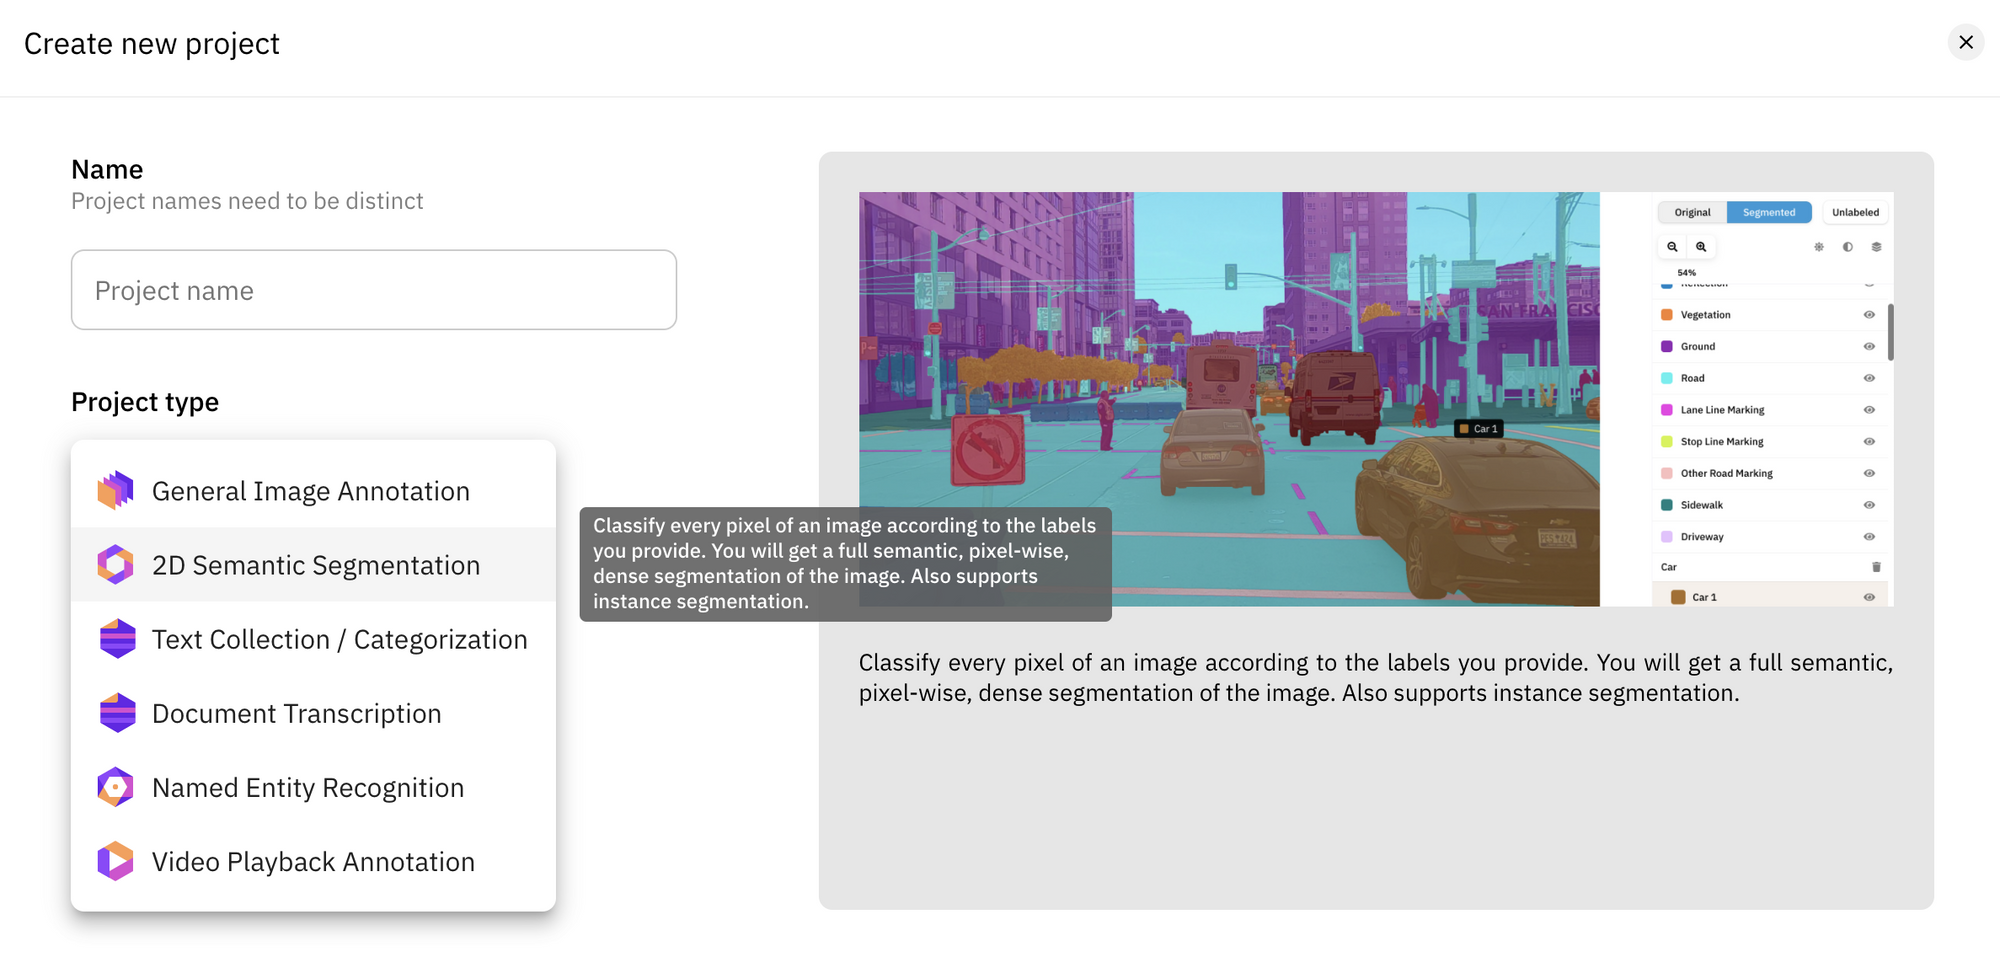 Browse project types and see examples of them. Pictured here is '2D Semantic Segmentation'.